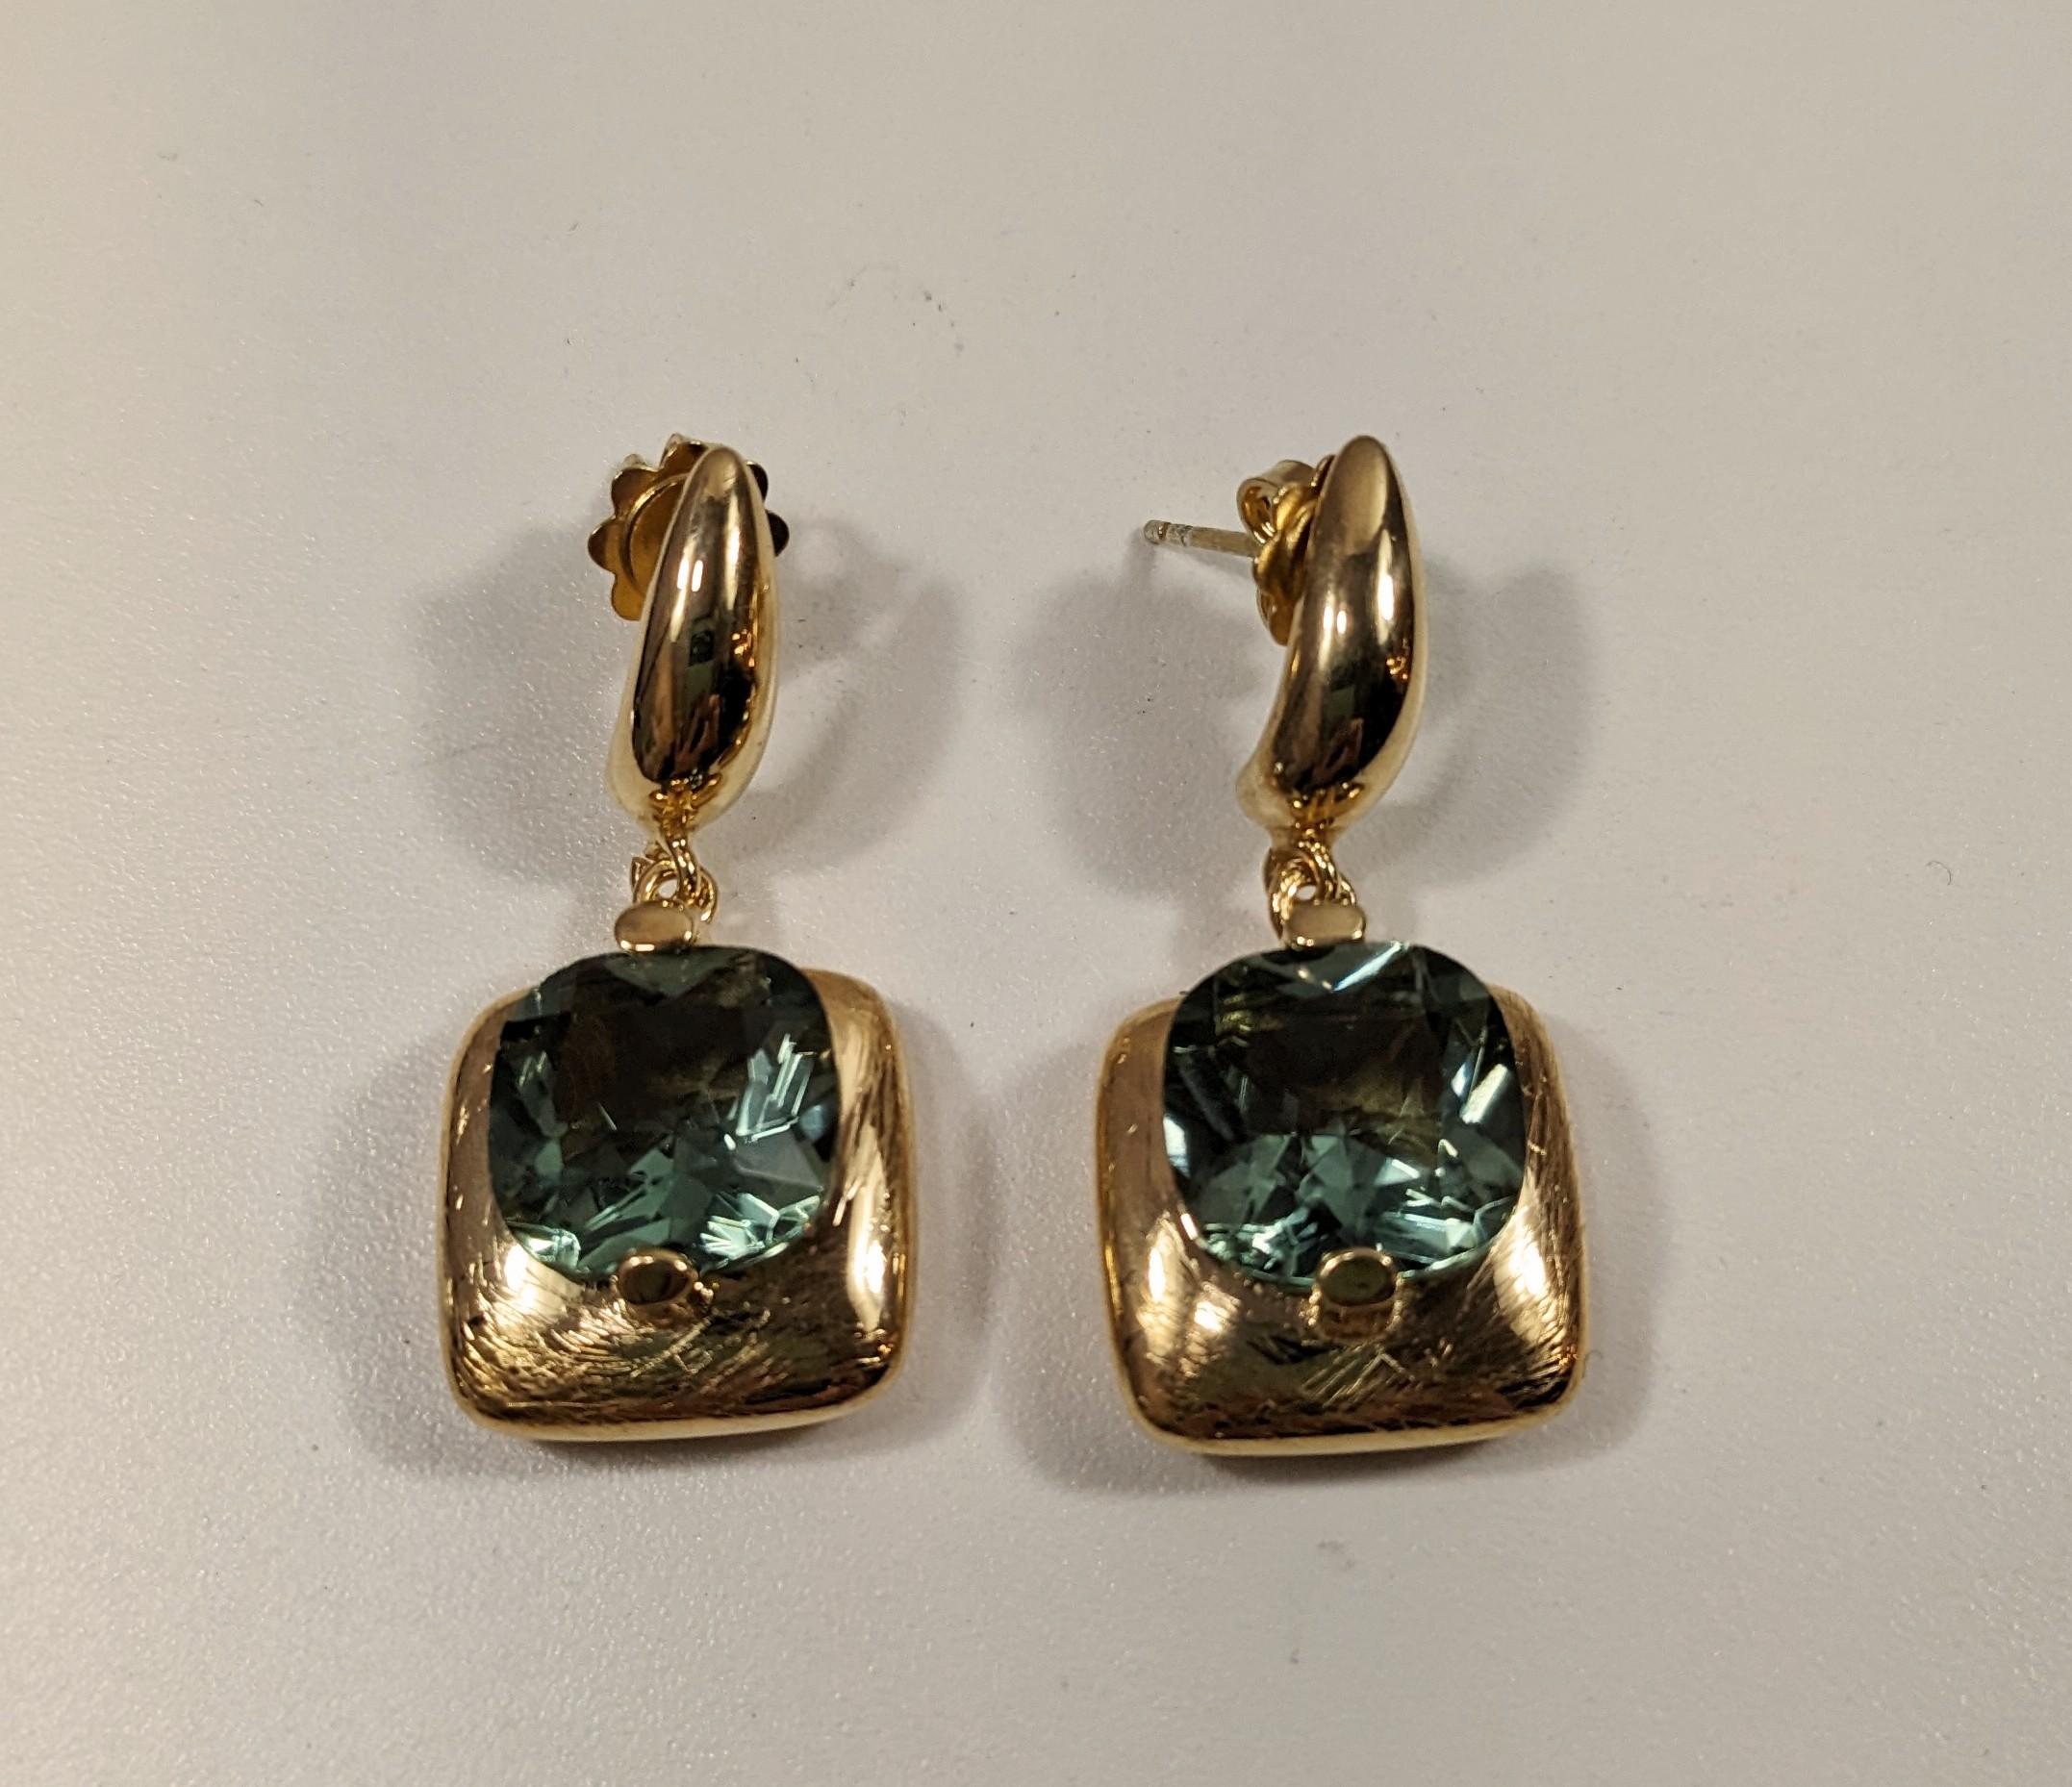  Earrings with carré cut quartz stone in gold plated silver cognac finish For Sale 4